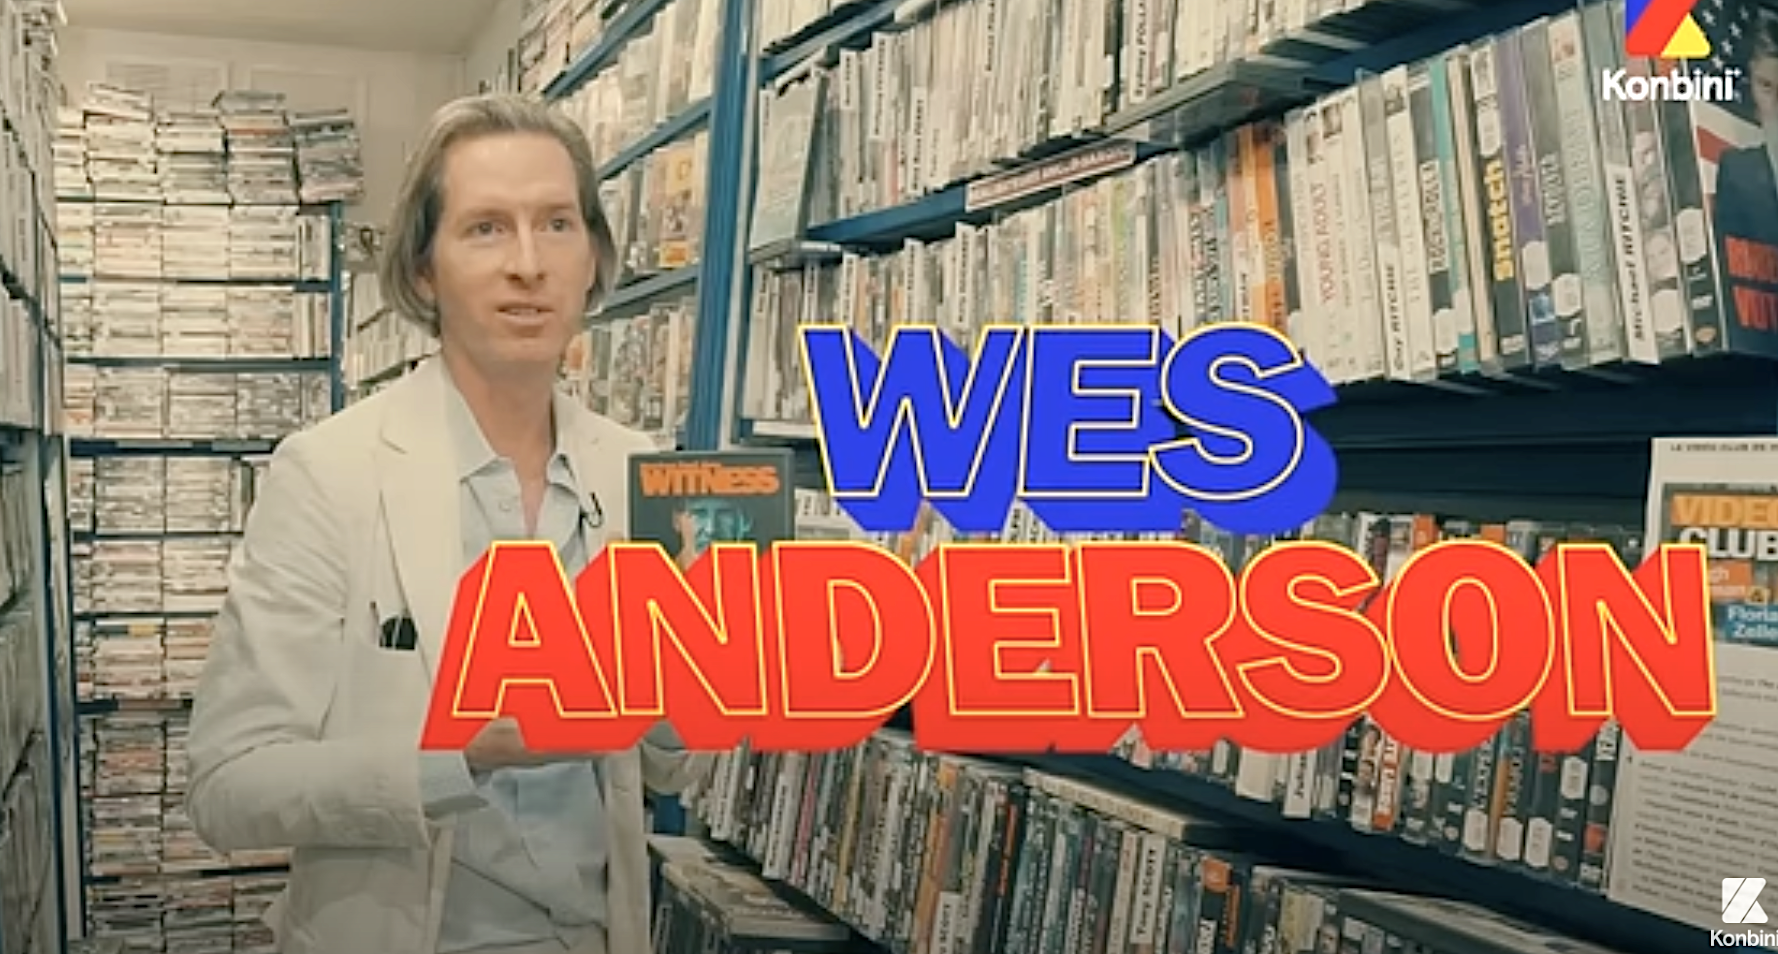 Accompany Wes Anderson on a stroll through a video store in Paris